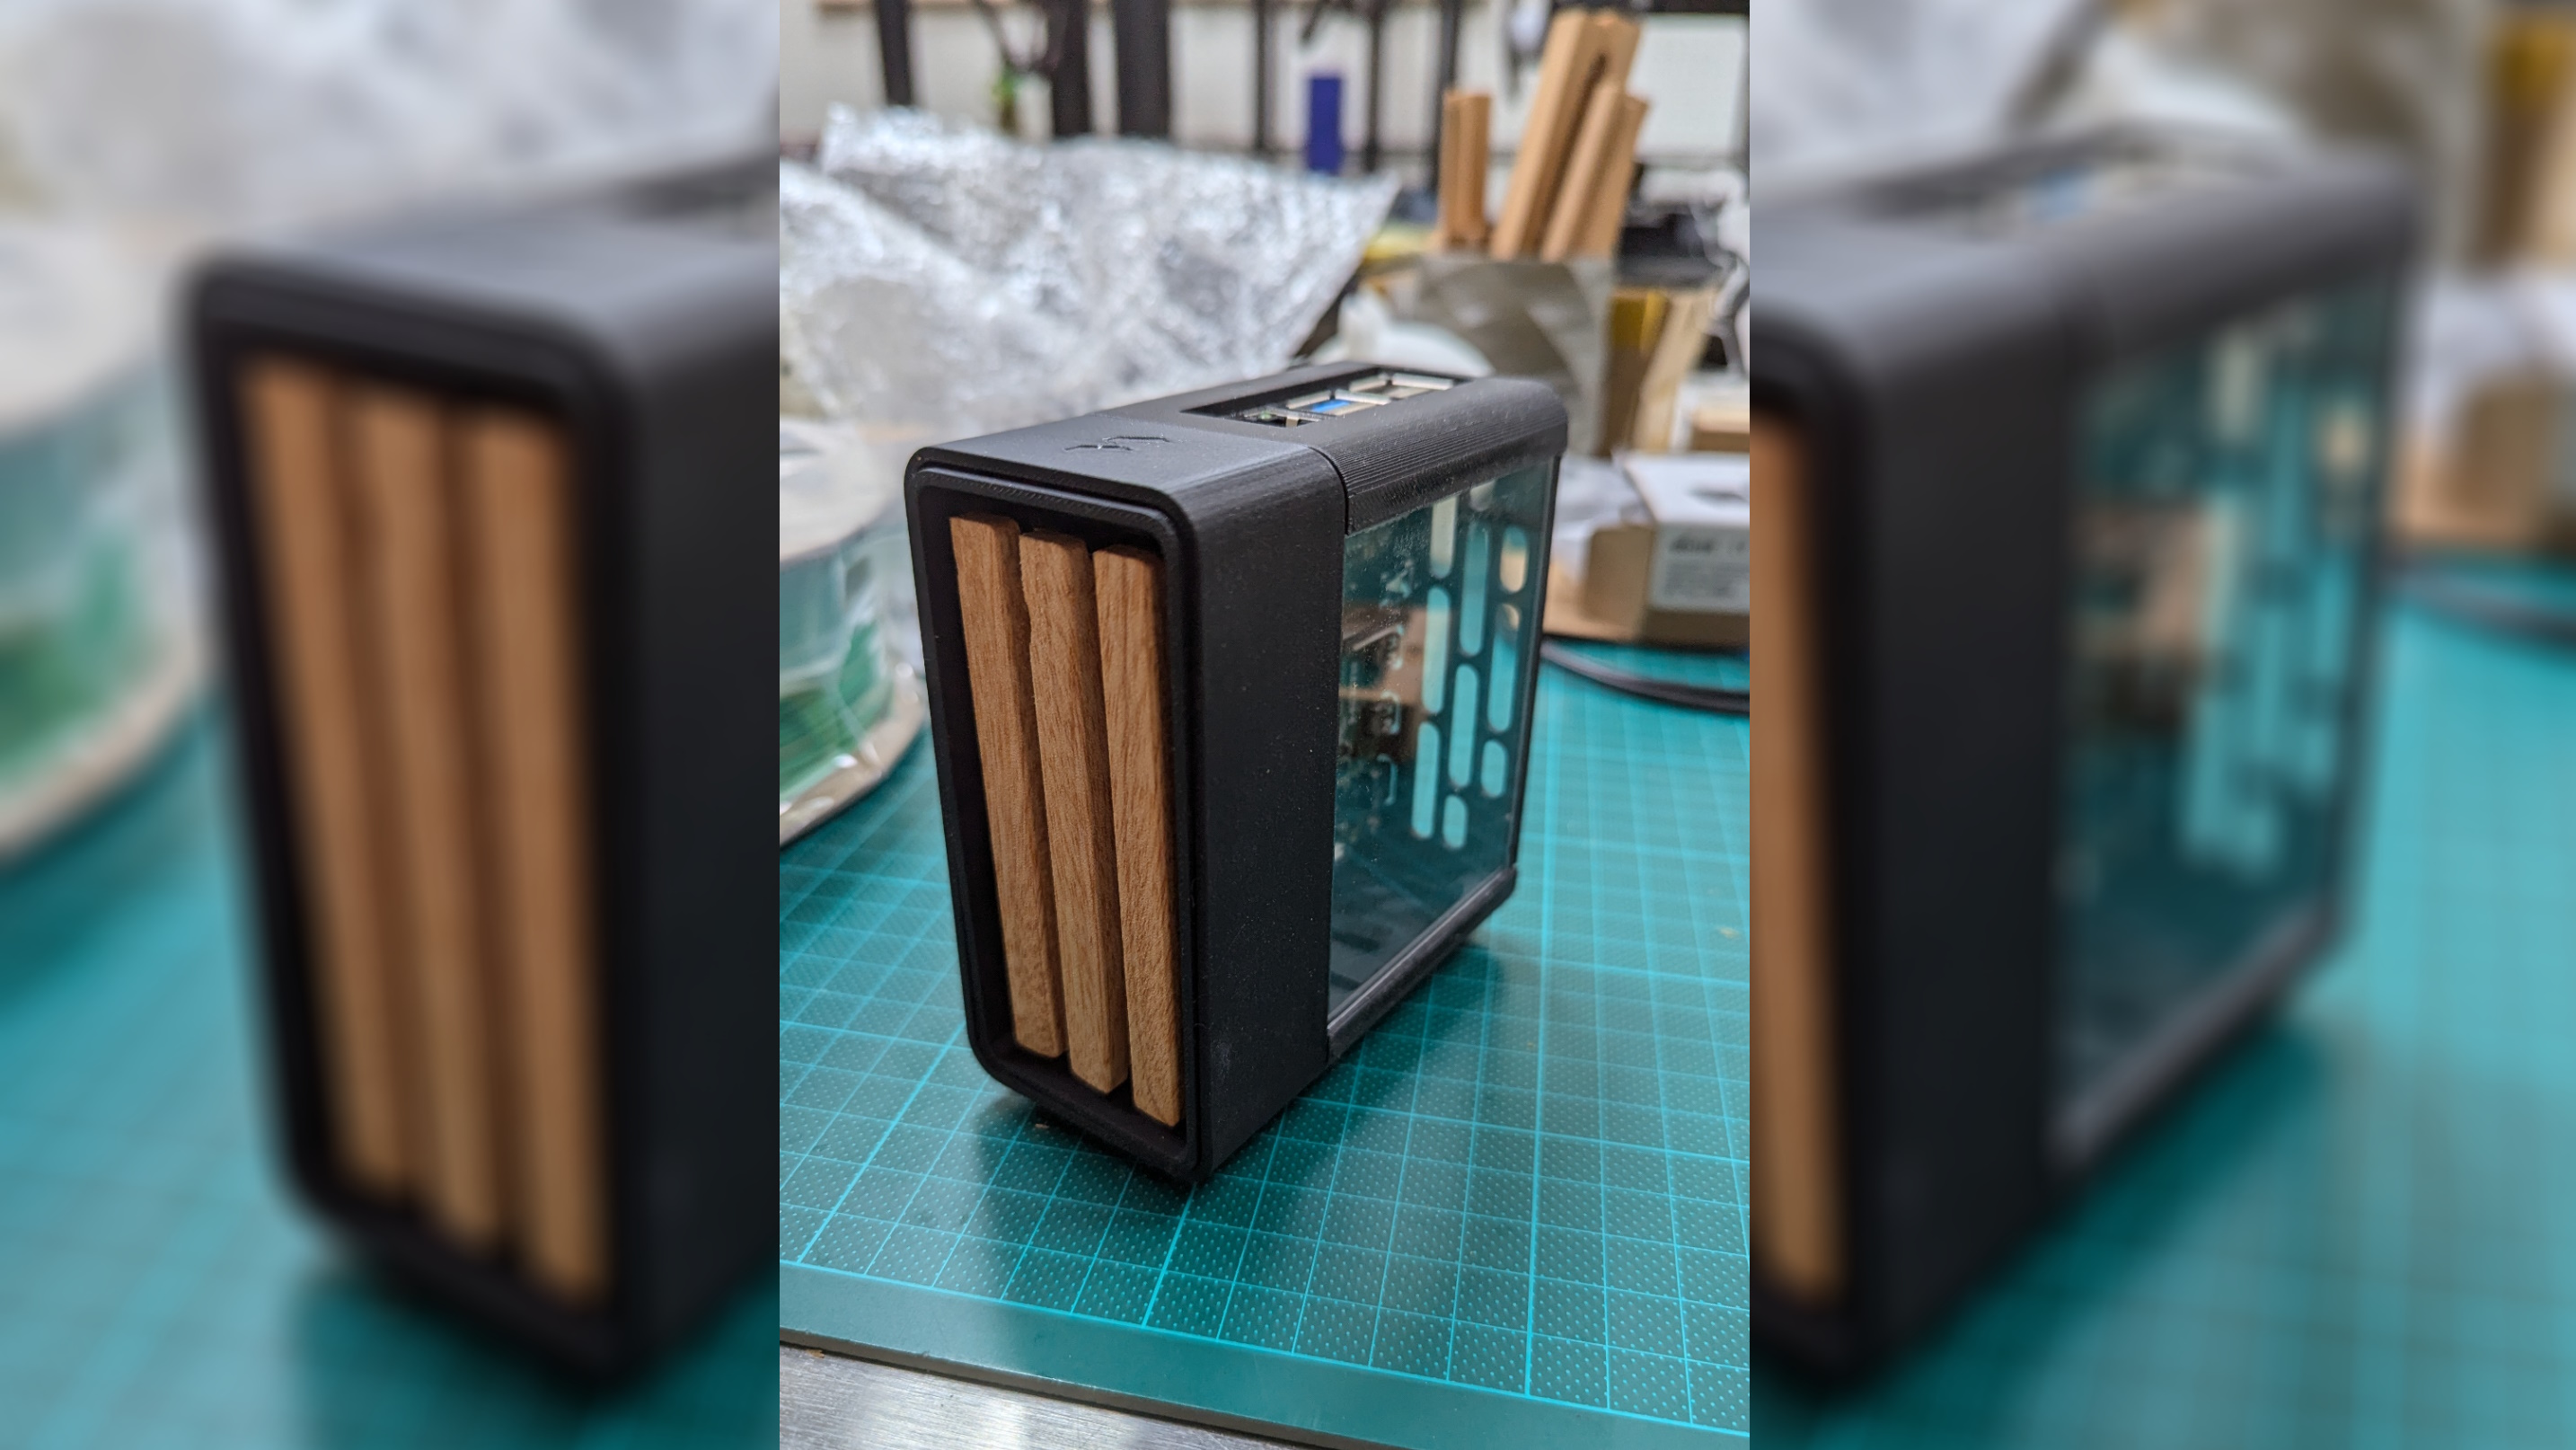  People are making mini Fractal Design cases for their Raspberry Pi and it's making me wish I owned a 3D printer so I could do the same 